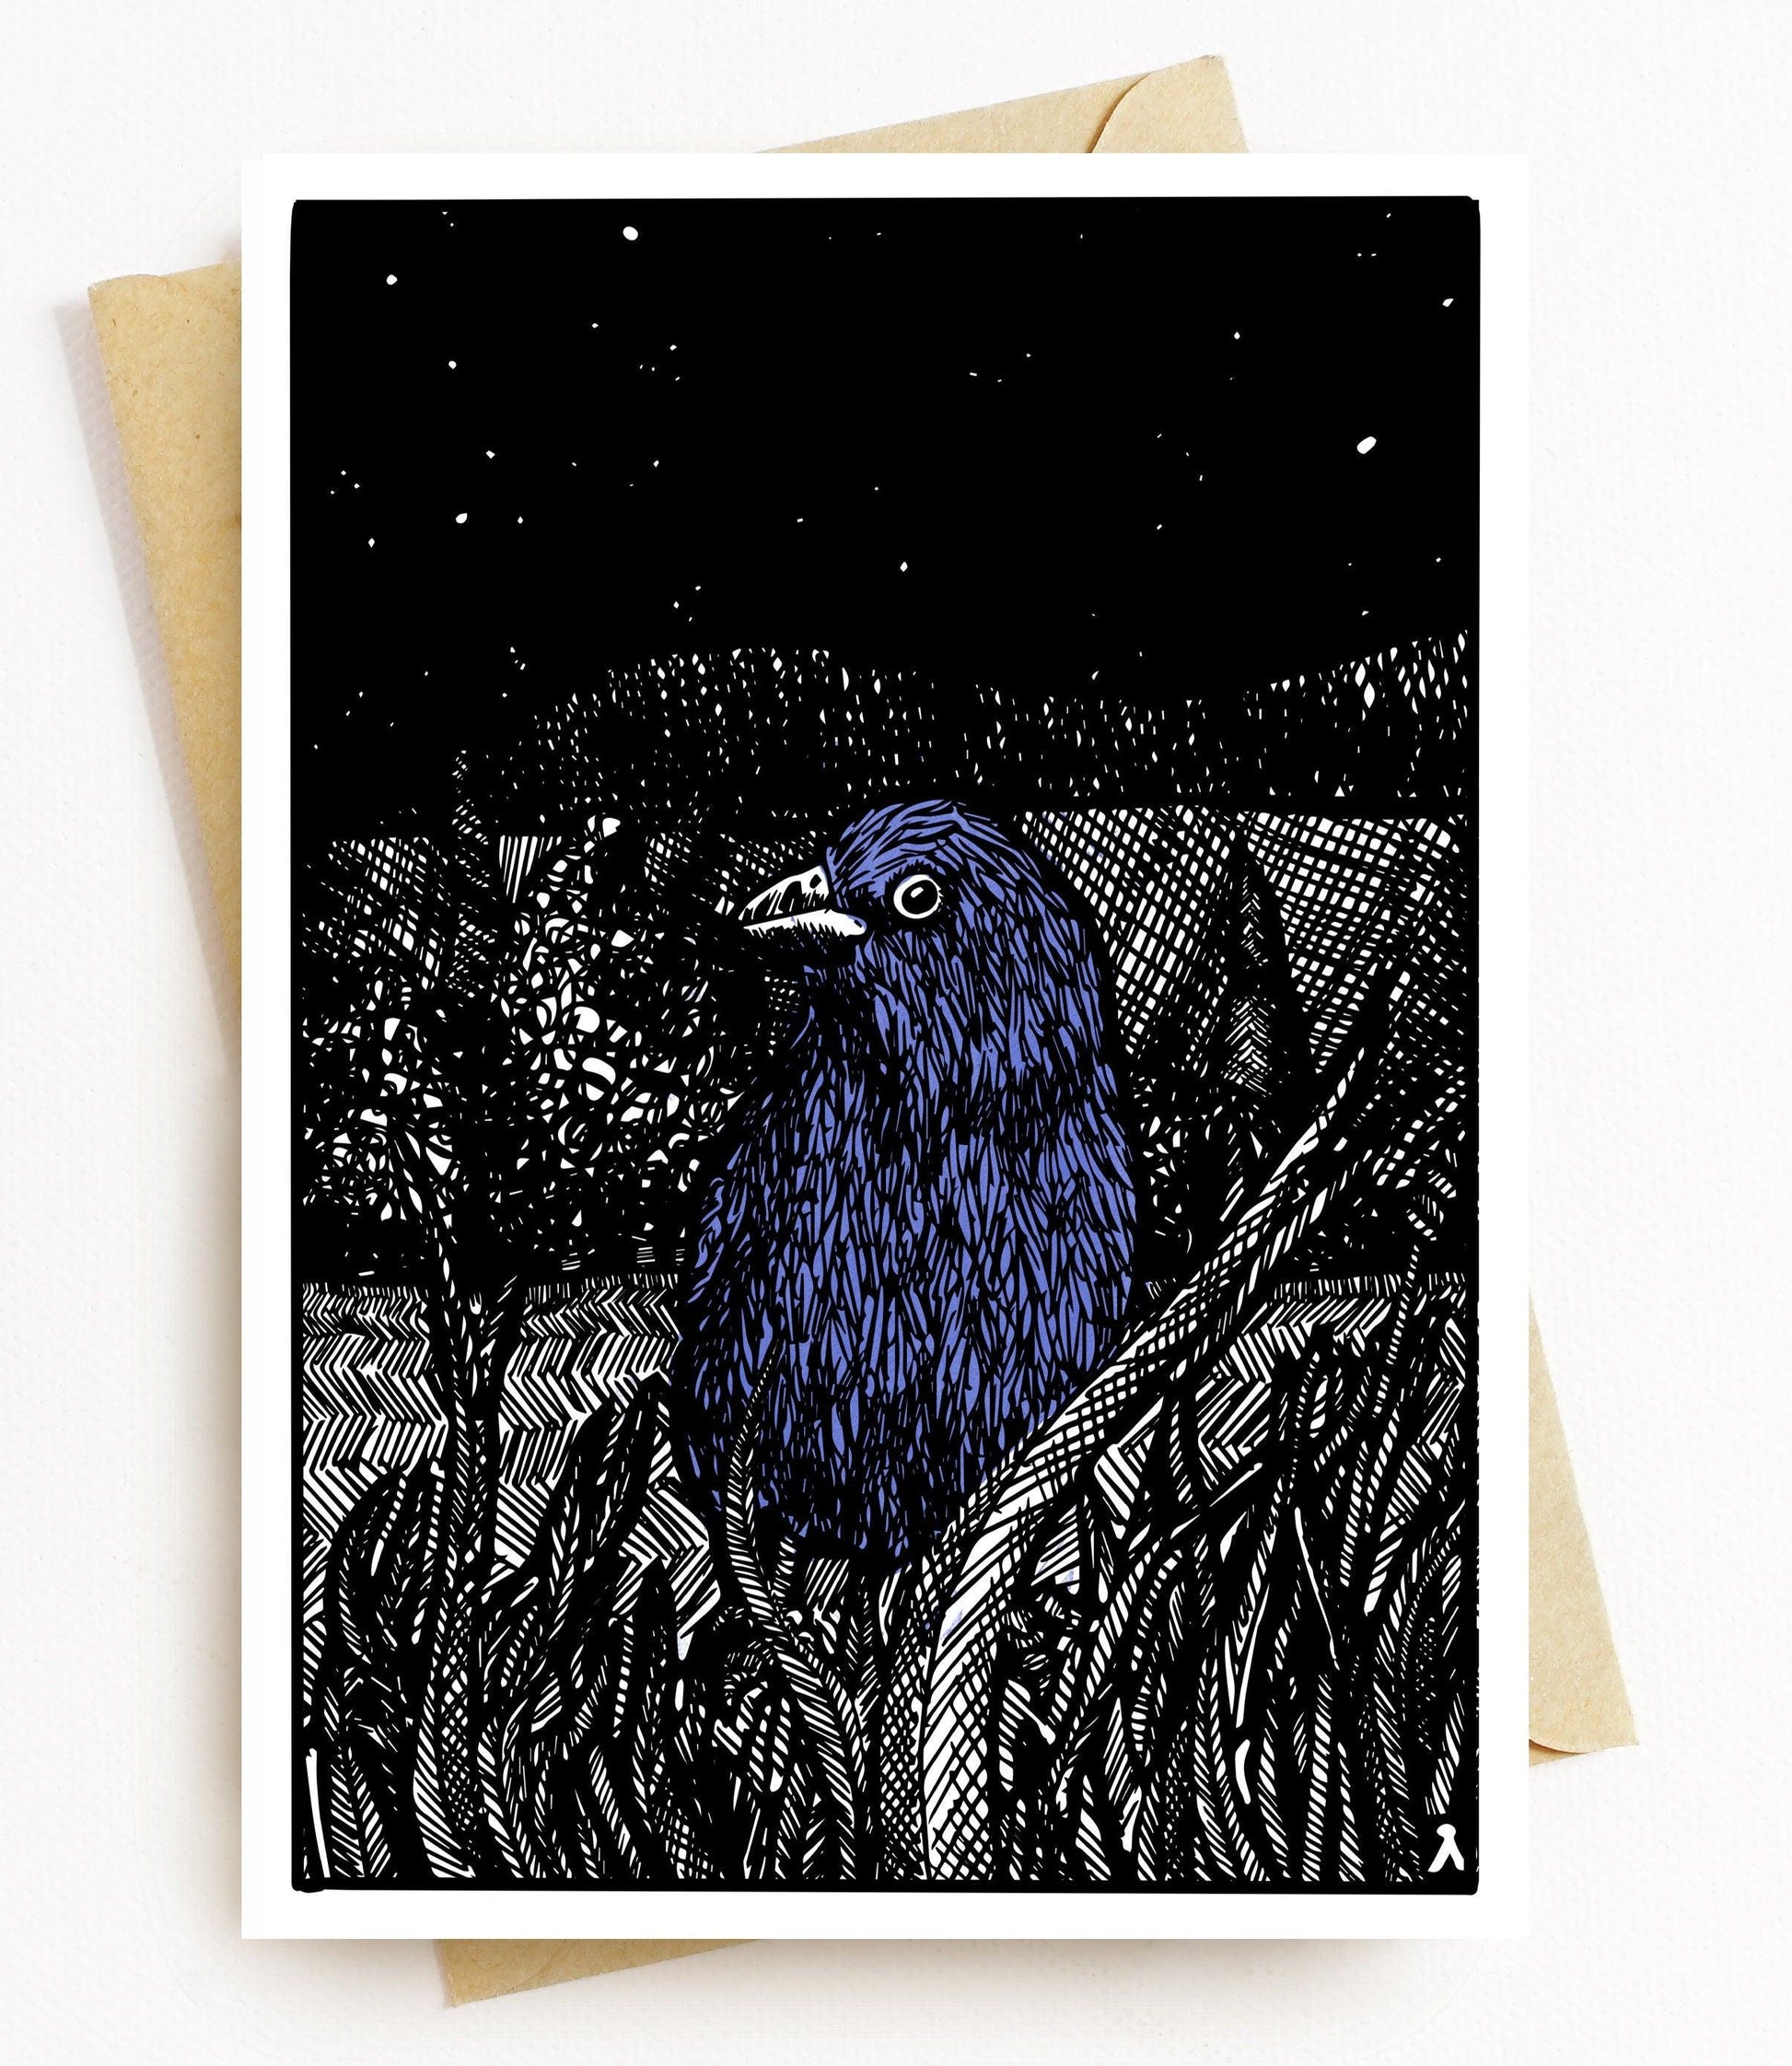 BellavanceInk: Greeting Card With Indigo Bunting In A Meadow Woodcut Style Illustration 5 x 7 Inches - BellavanceInk